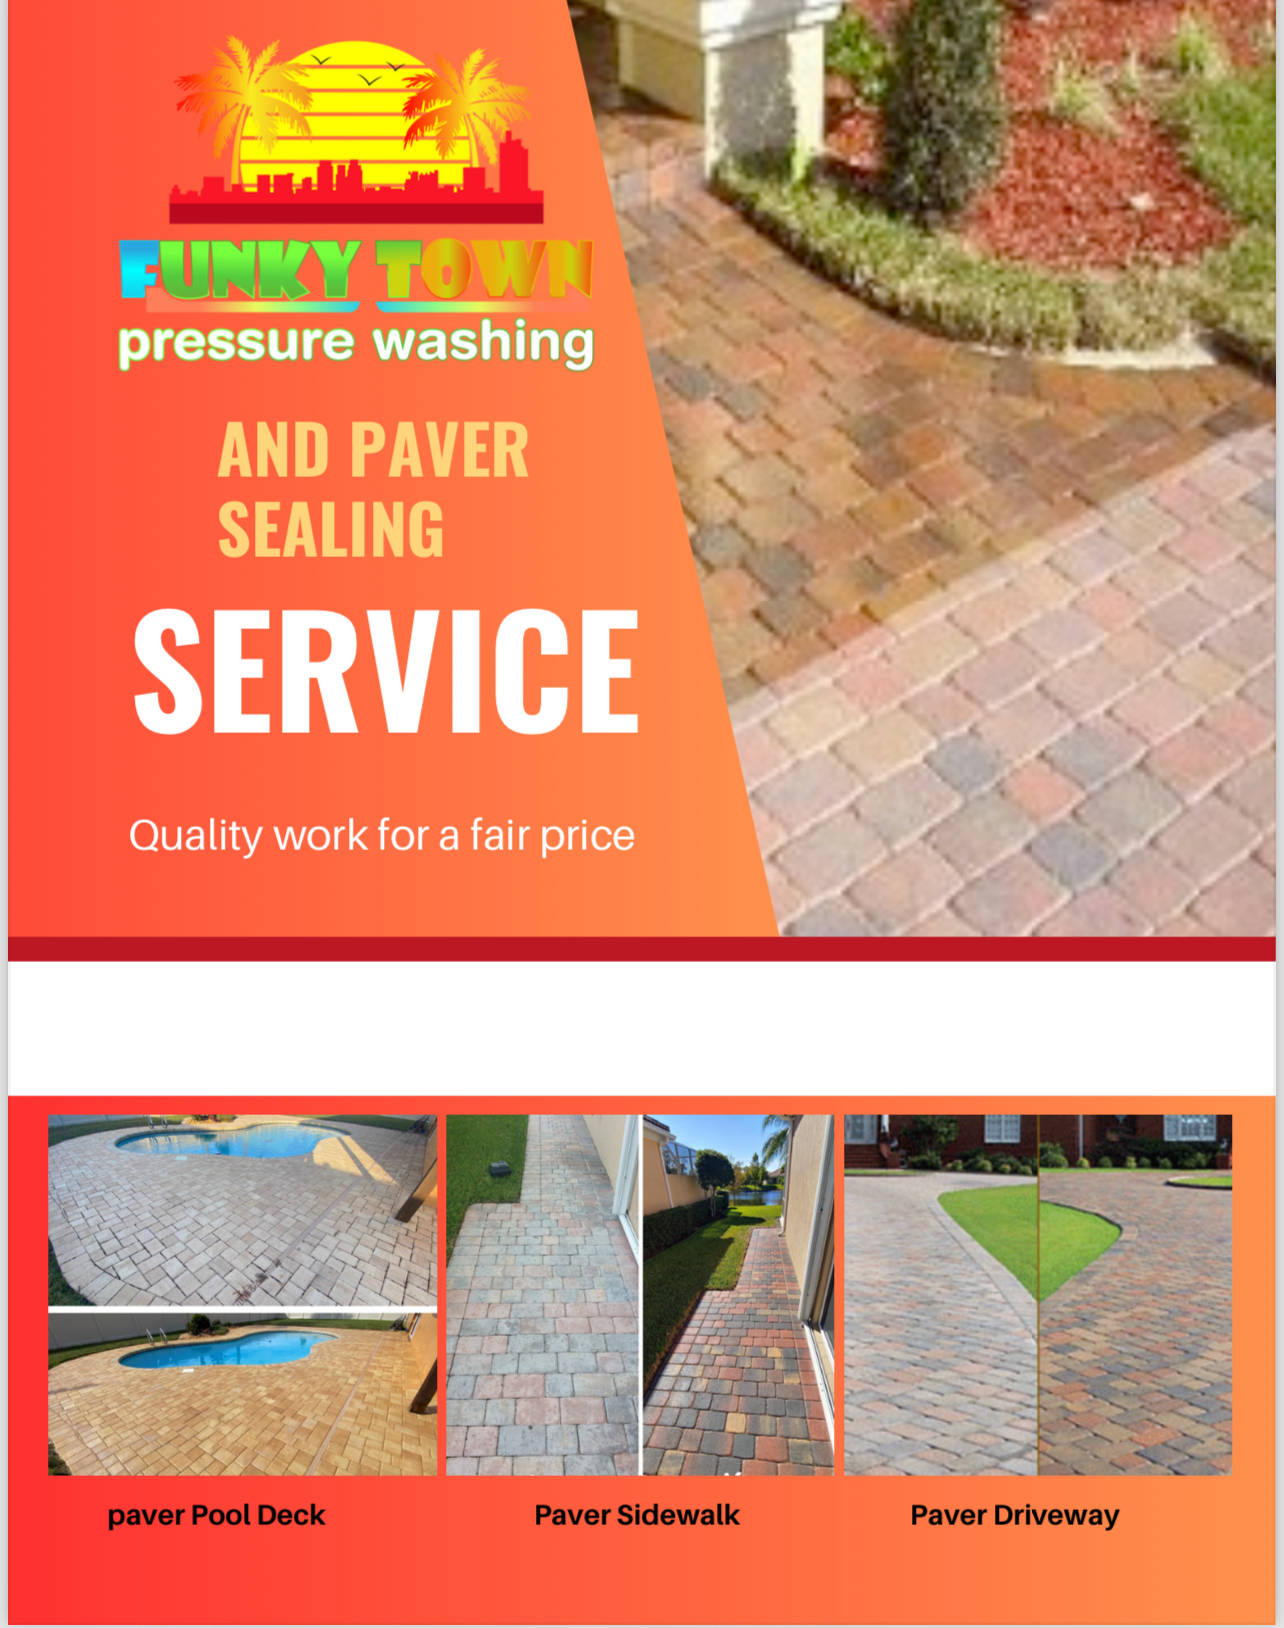 Funky Town Pressure washing and Paver Sealing